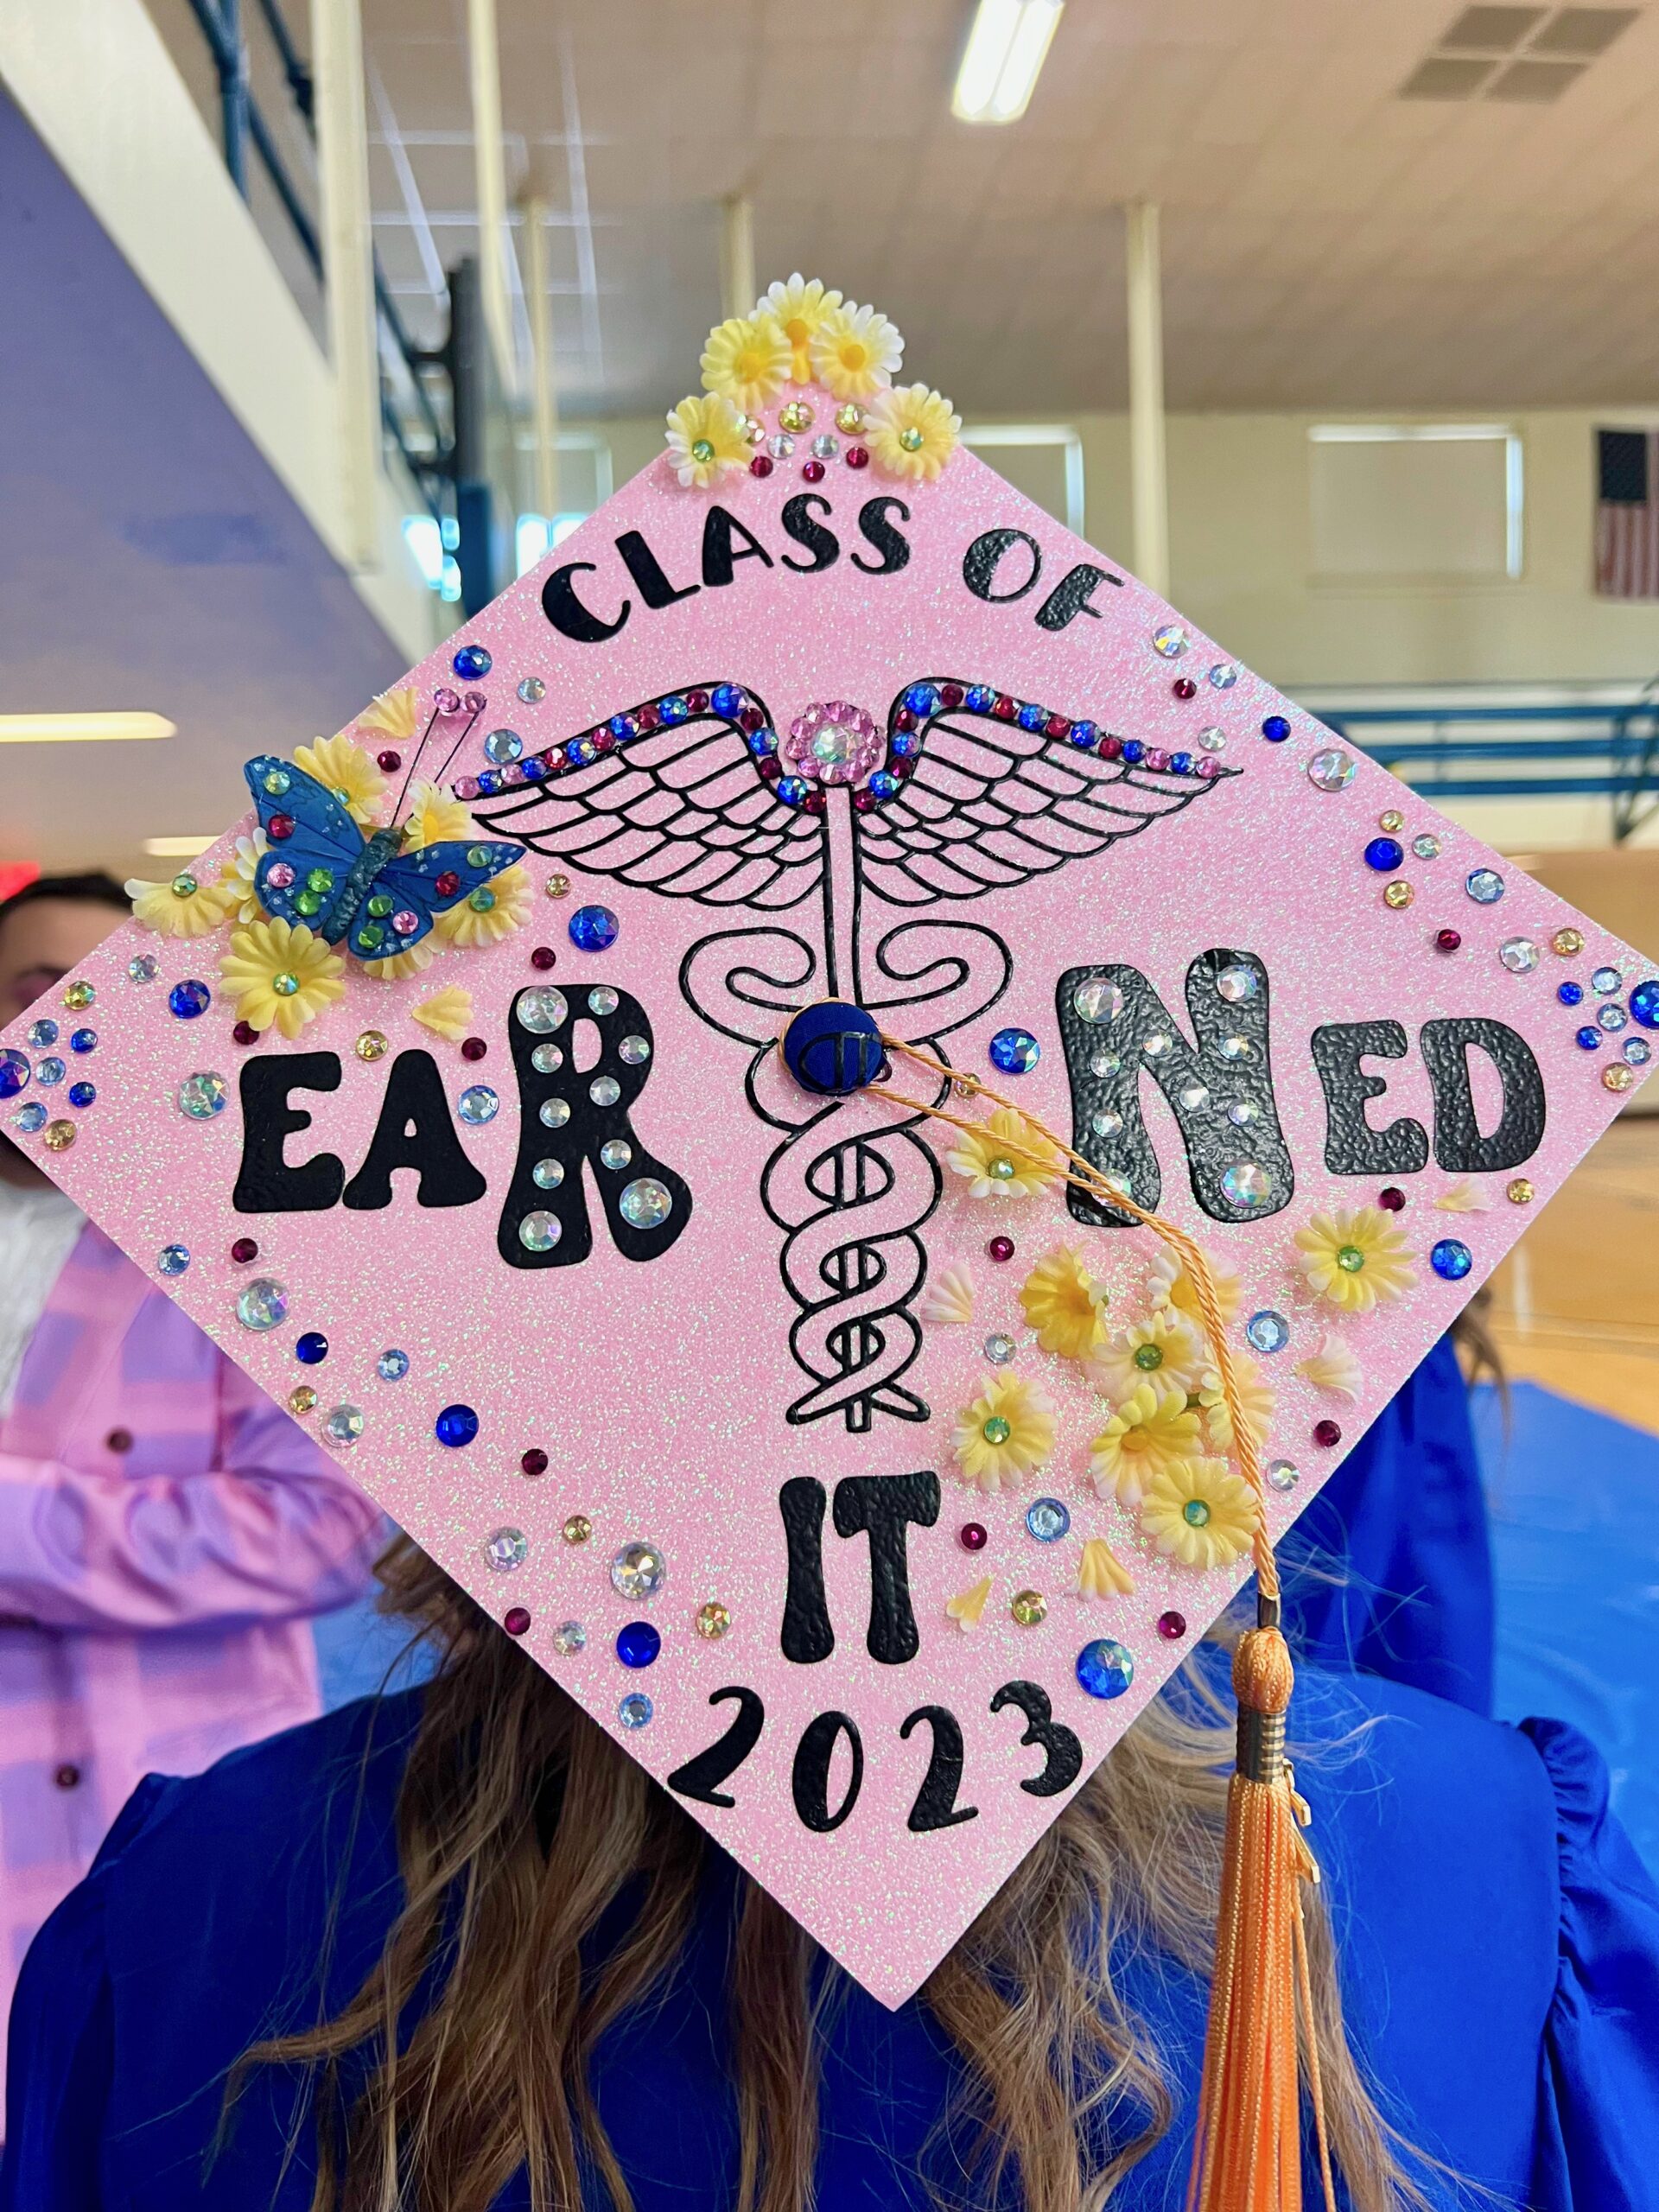 Decorated mortarboard reading "Class of 2023, Earned it"